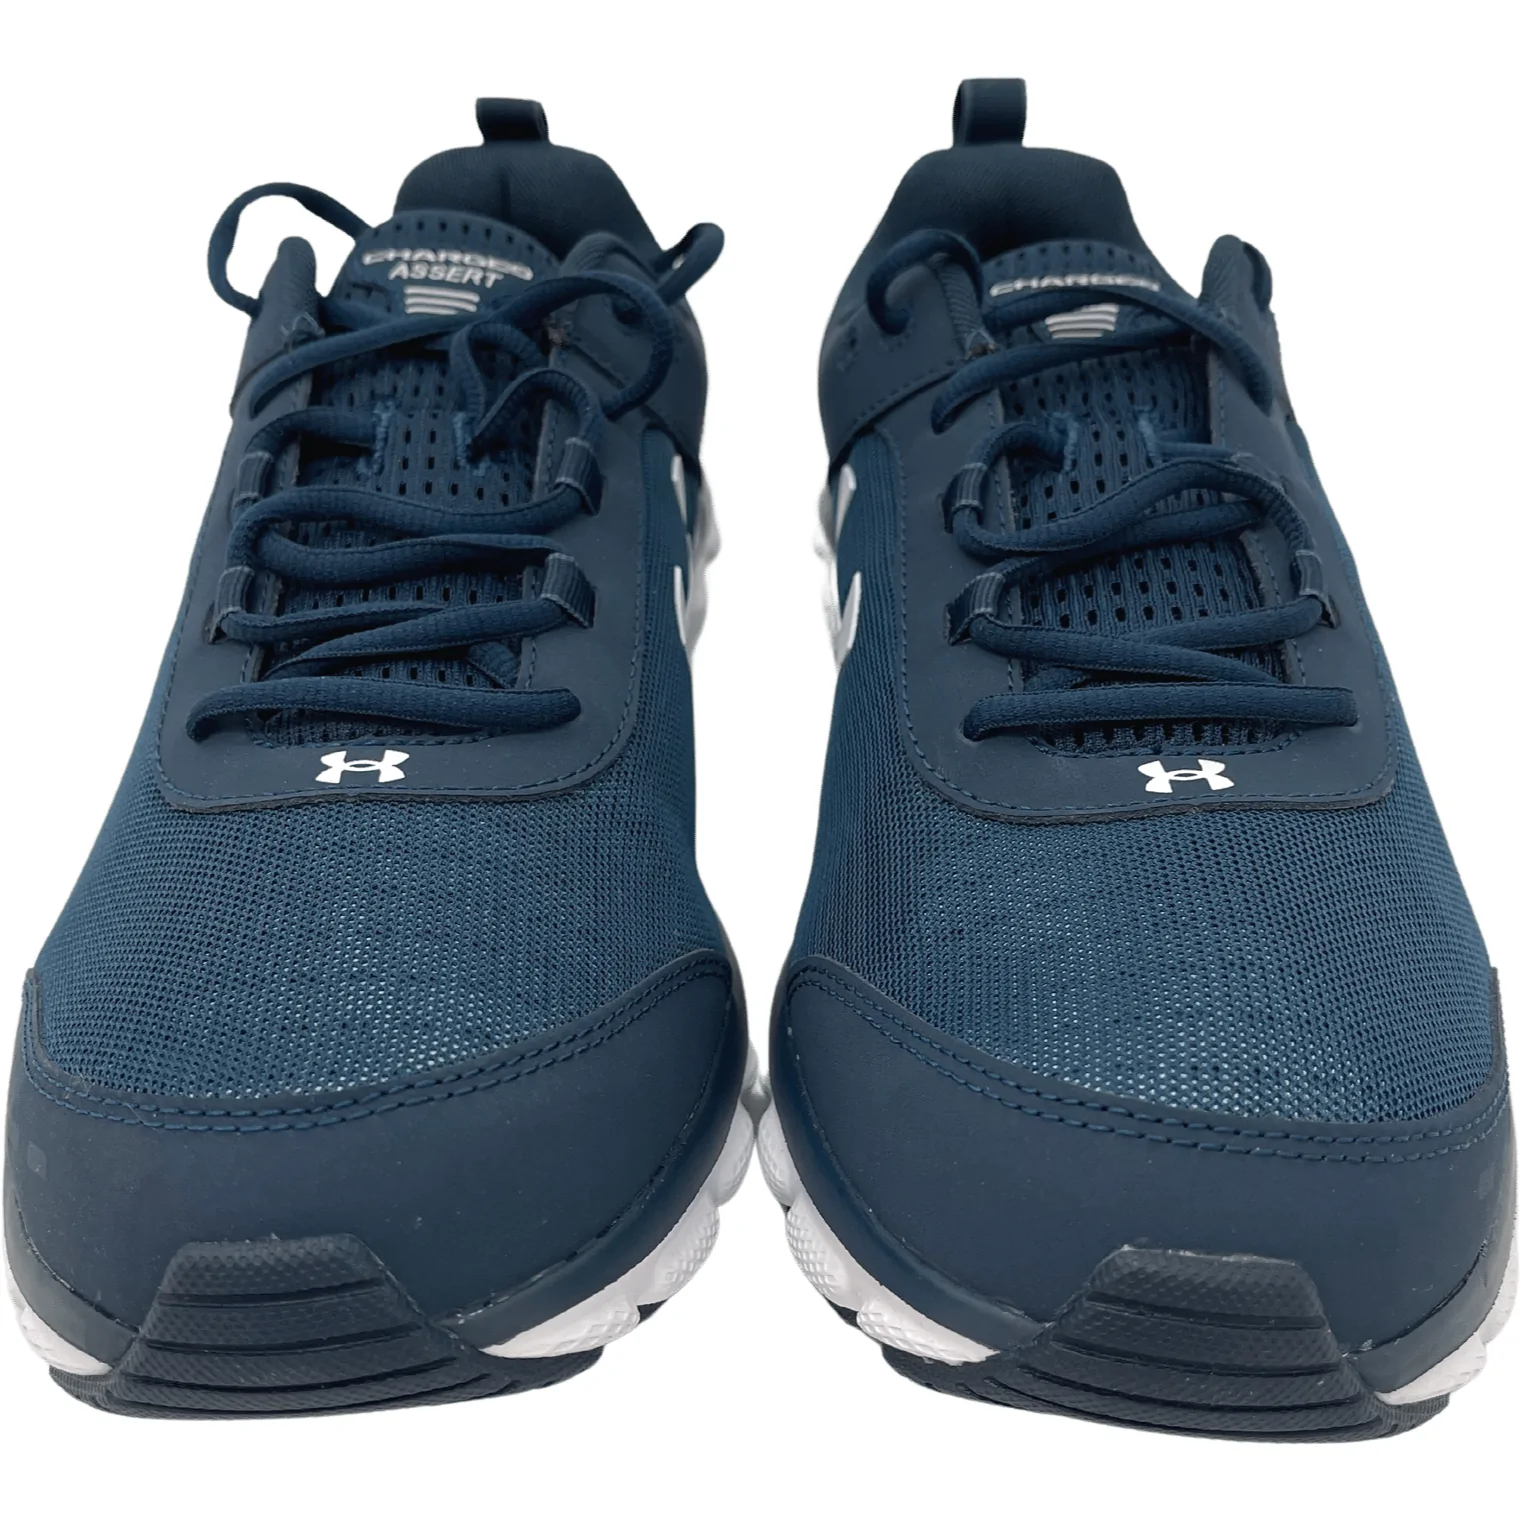 Under Armour Men's Running Shoes / UA Charged Assert 8 / Navy & White / Size 13